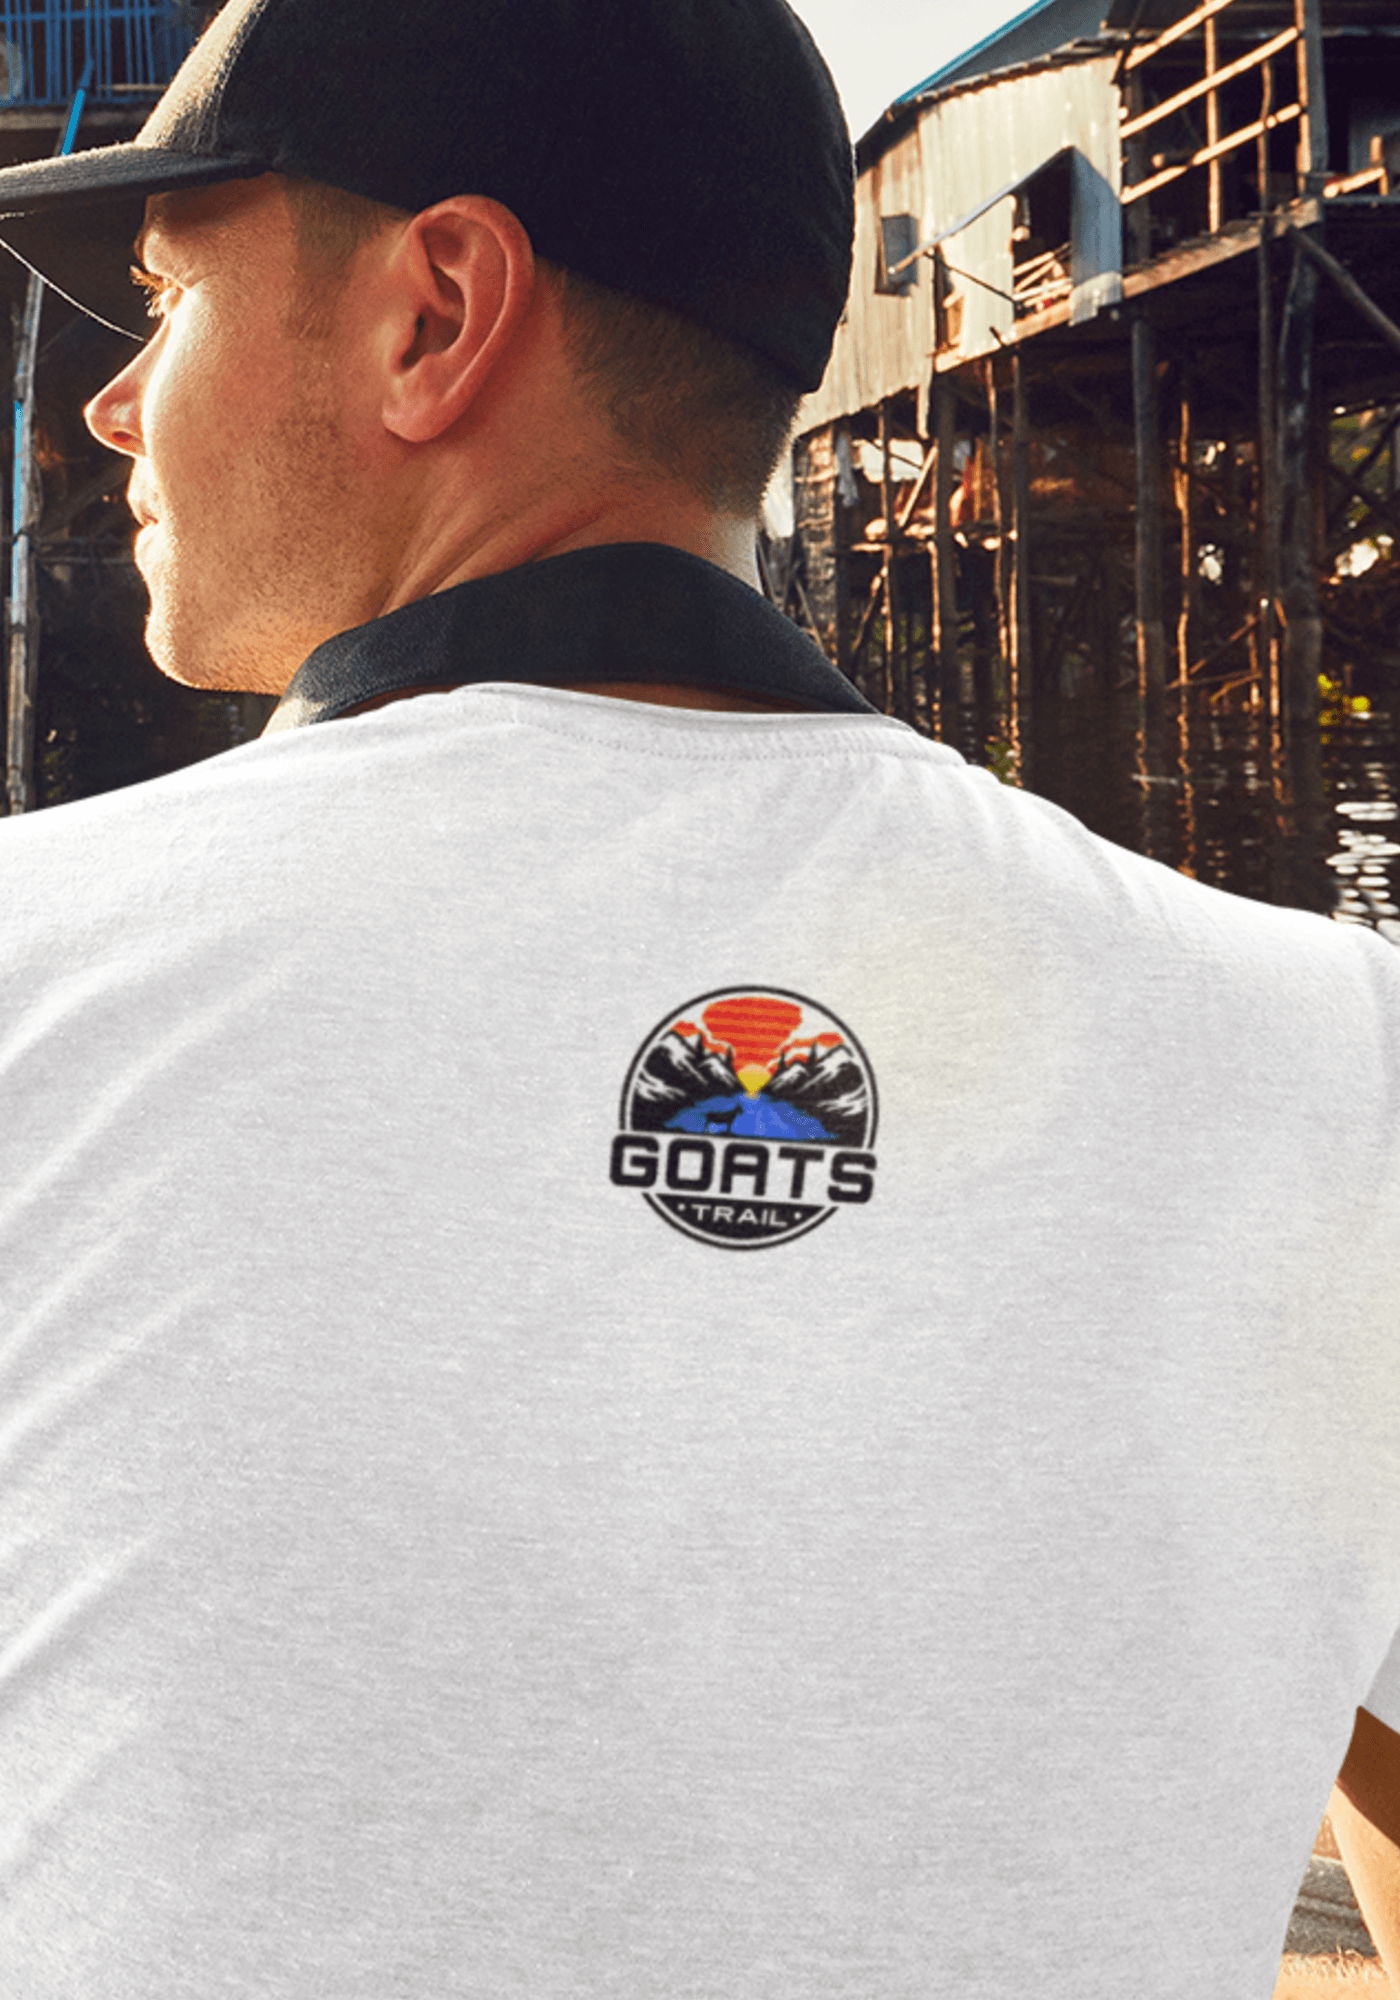 Off Roading Apparel - Goats Trail